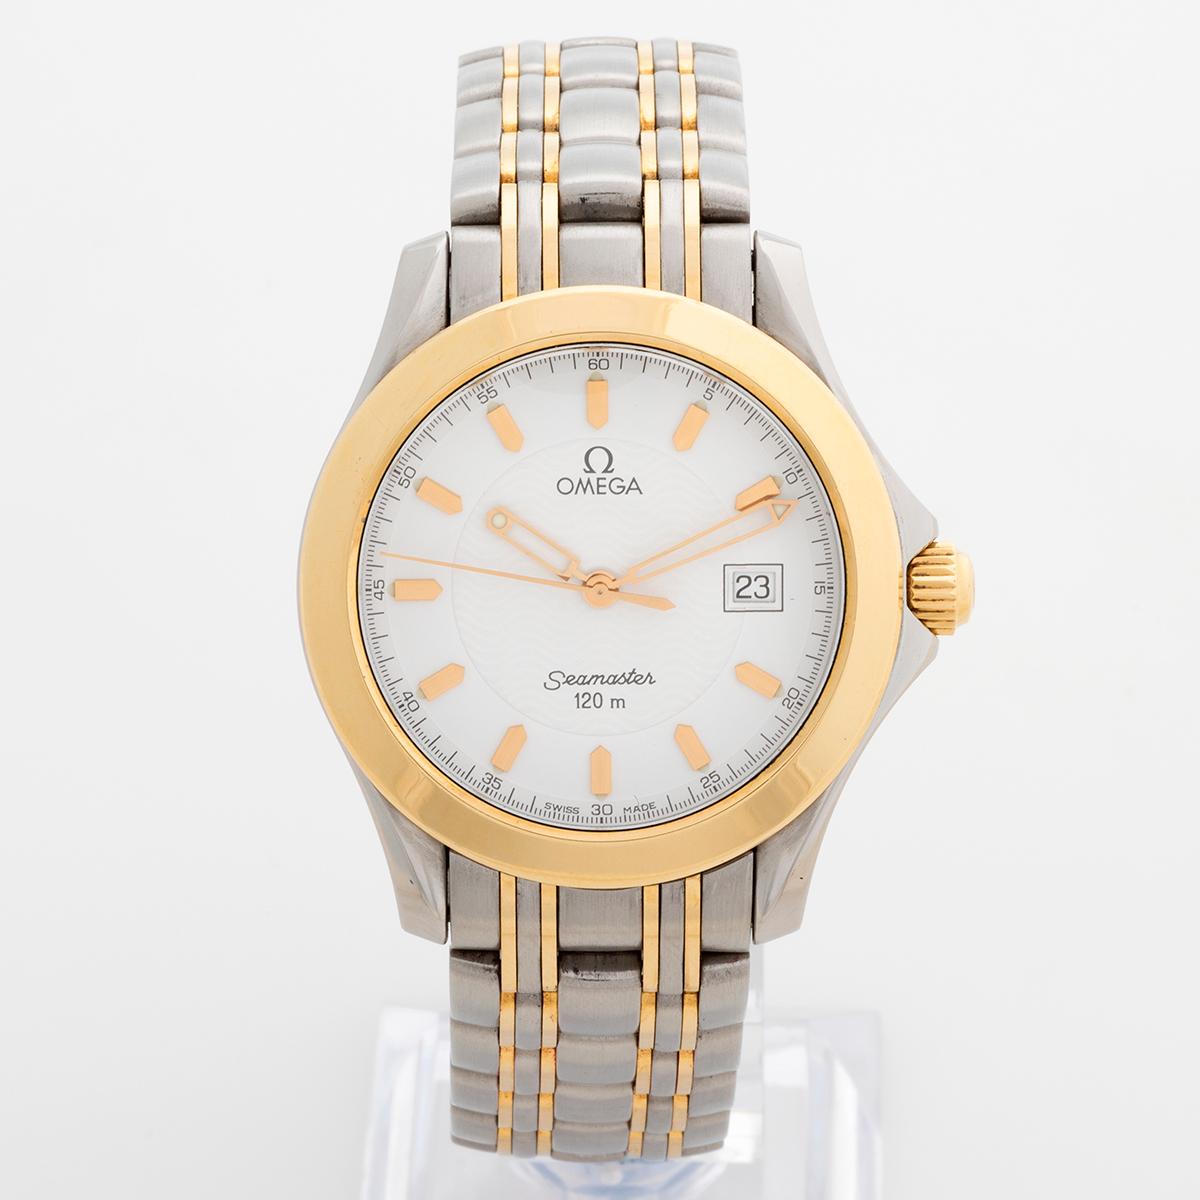 Our rare and very desirable Omega Seamaster reference 2311.21.00 features a stainless steel and 18k yellow gold 36mm case and stainless steel and 18k yellow gold bracelet with white dial, powered by a quartz movement. This example is presented in